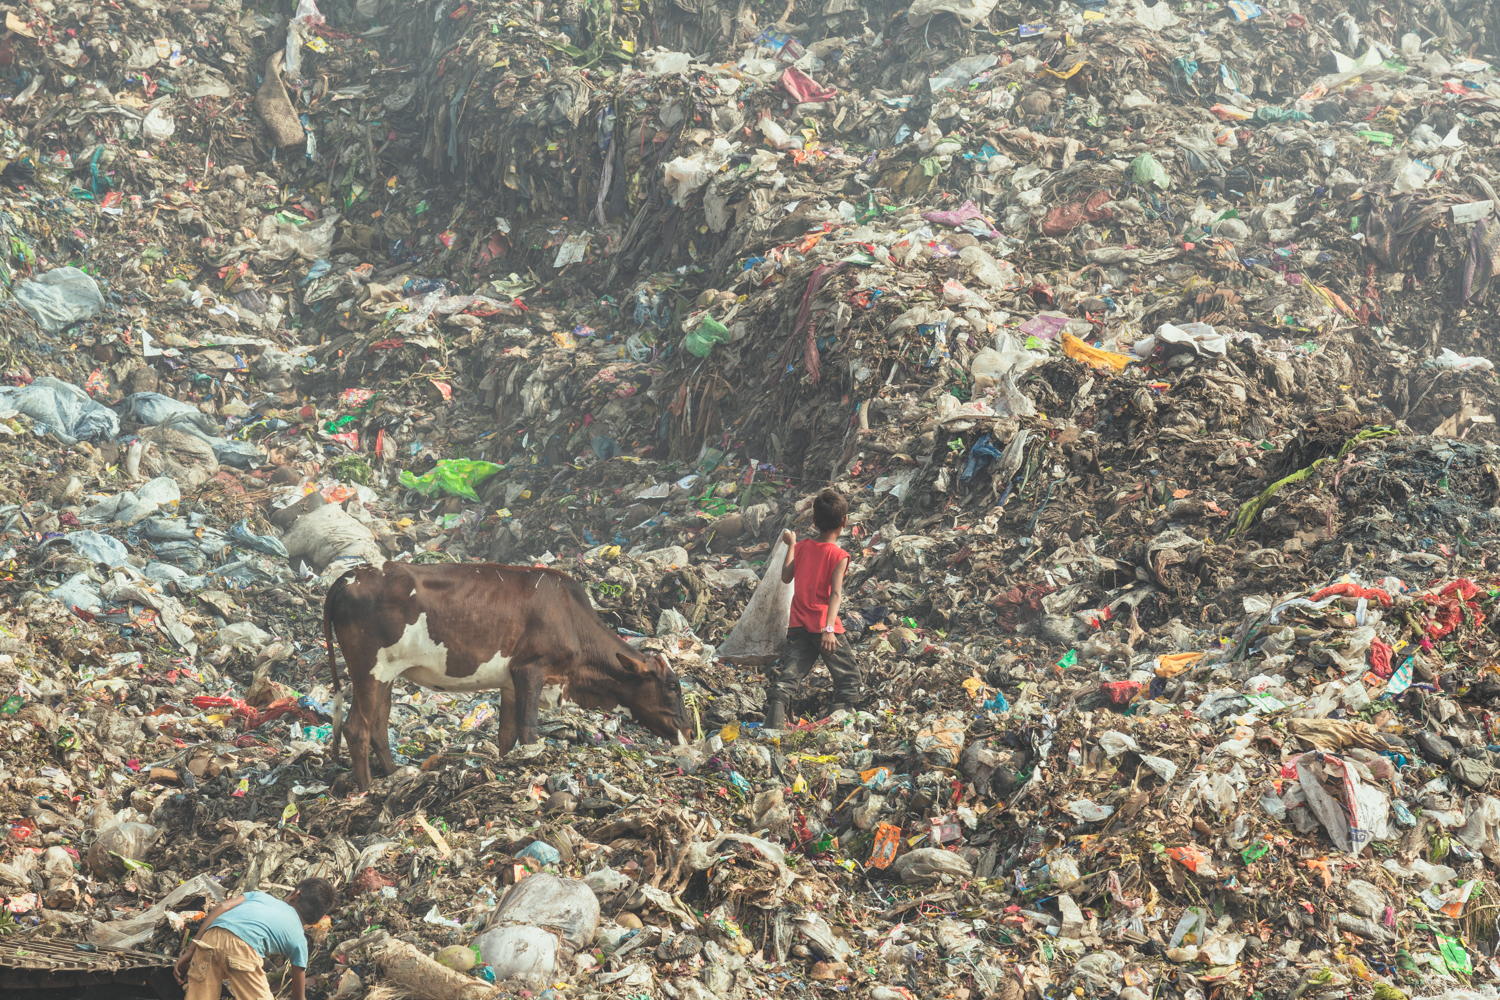 Mountains of rubbish for the Waste Pickers of Chittagong, Bangladesh to search.